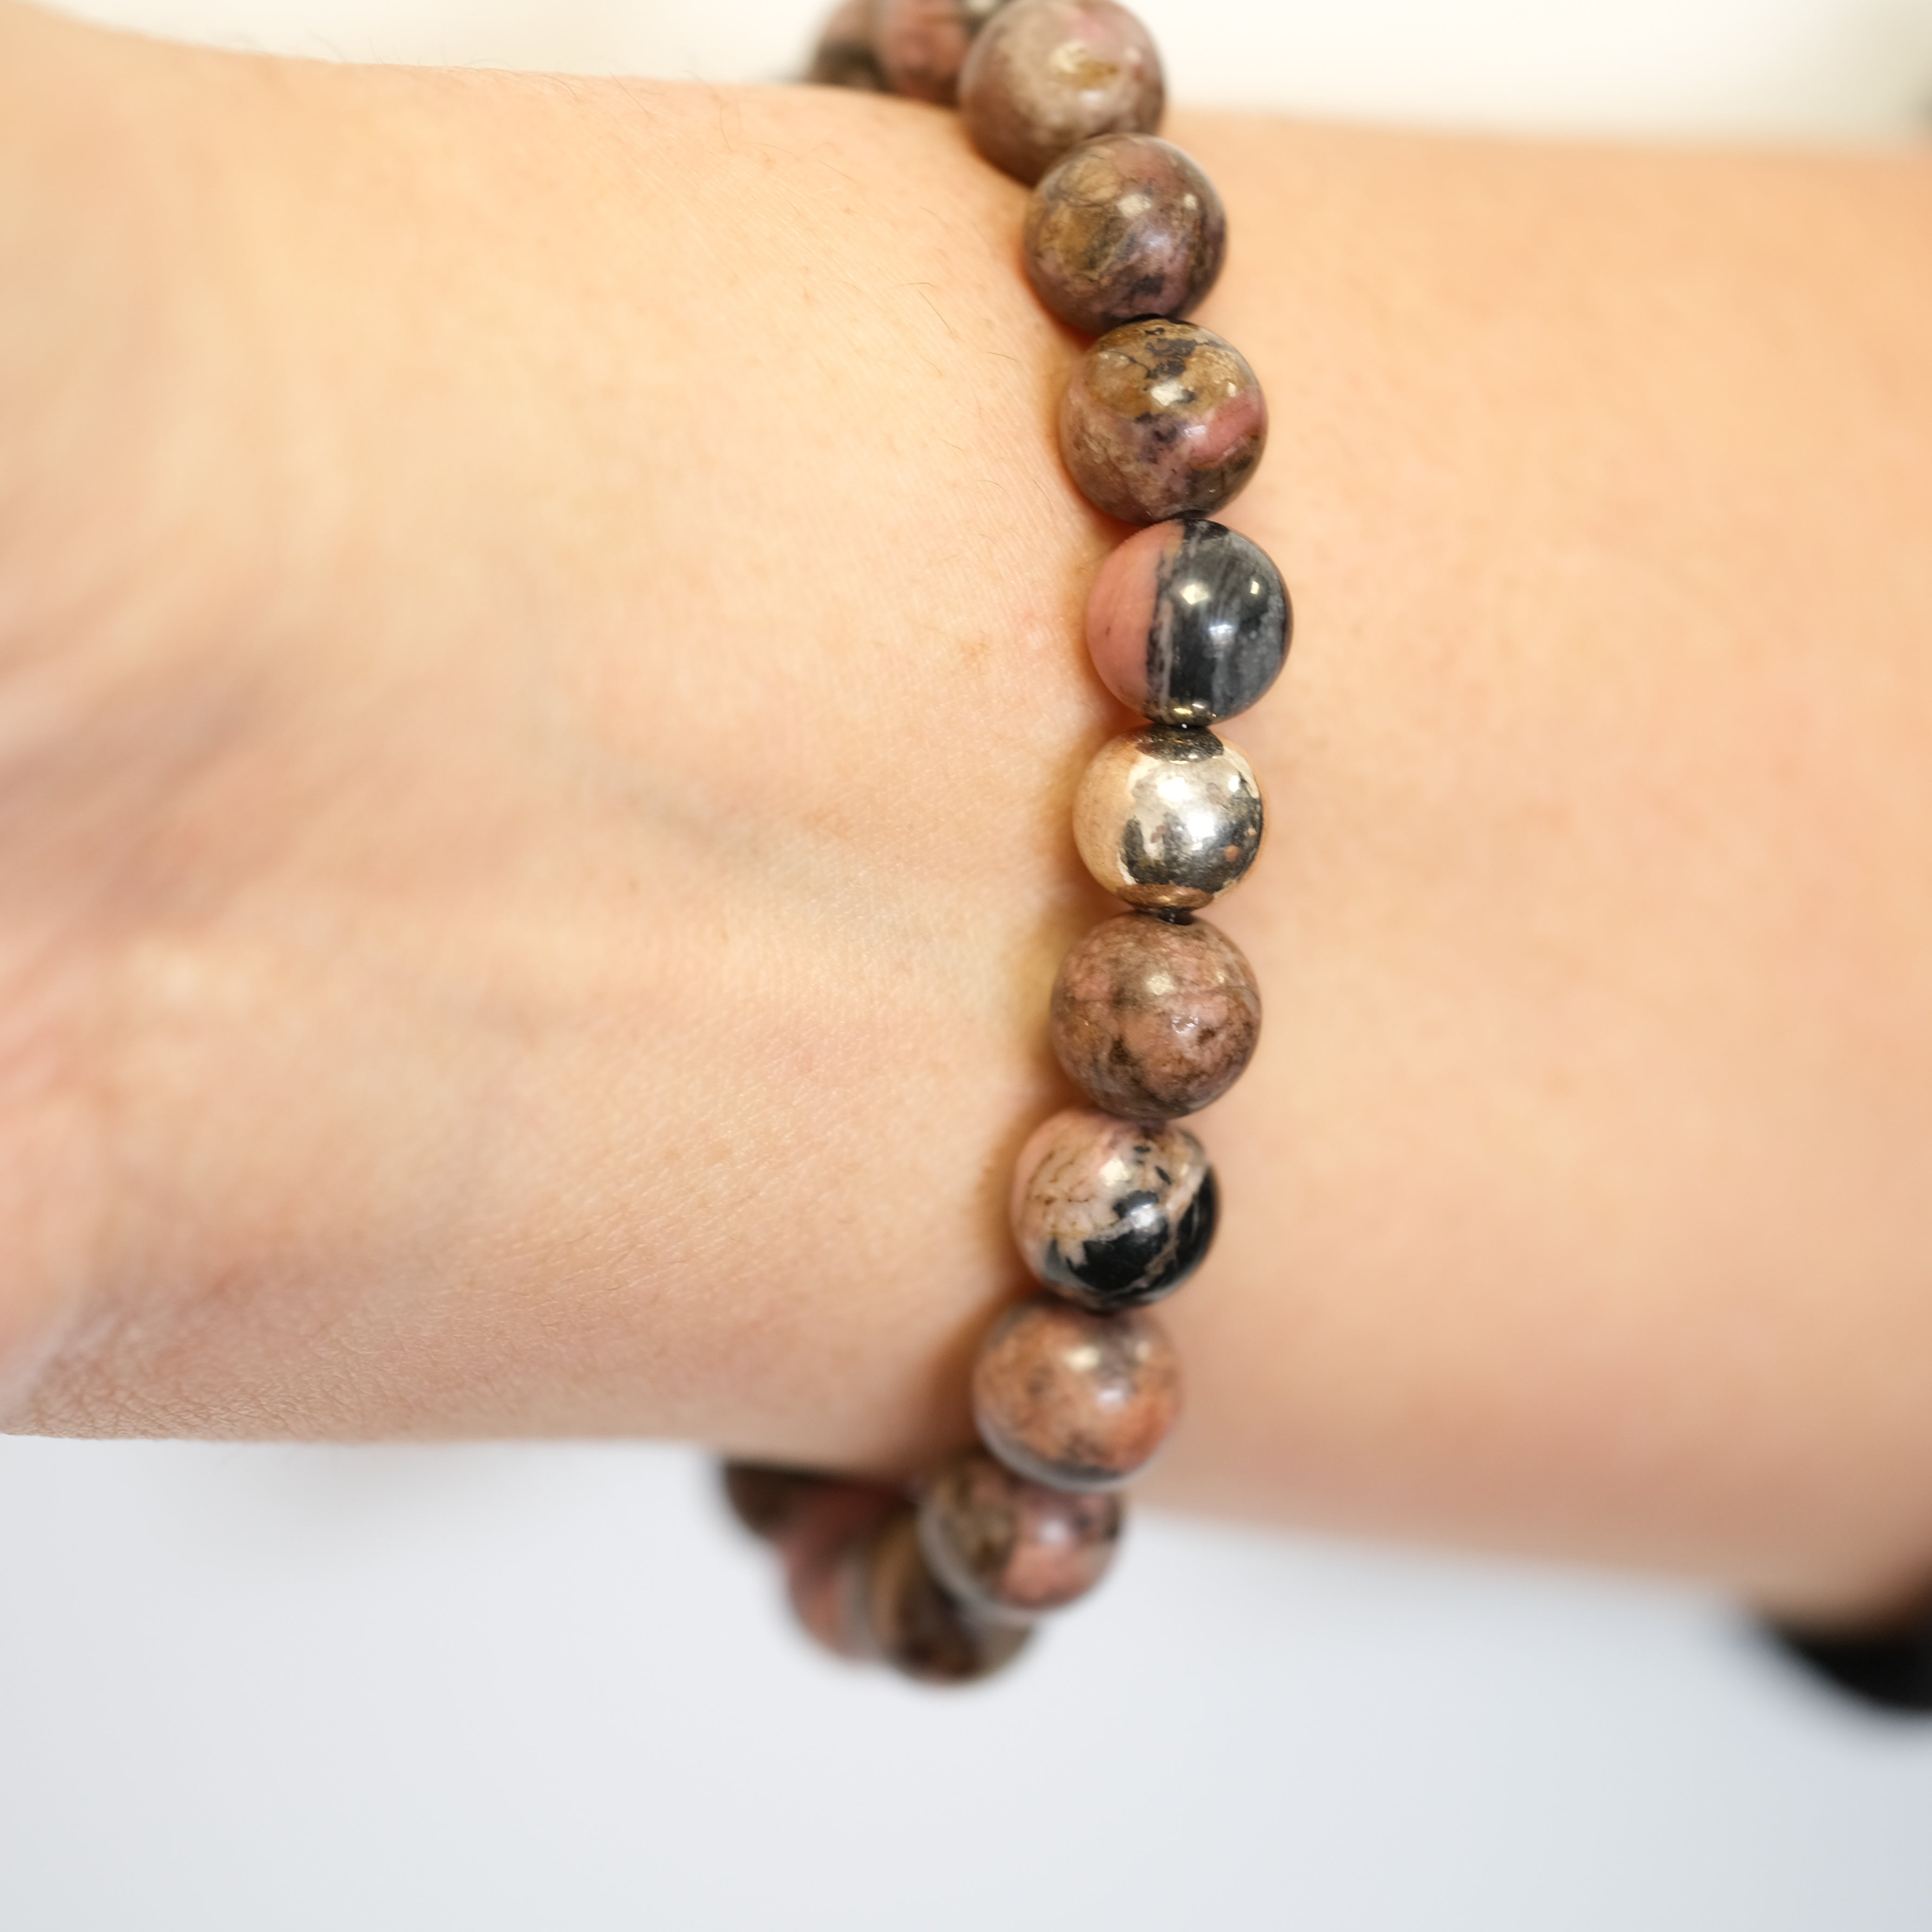 A Rhodonite gemstone bracelet with gold accessories worn on a model's wrist from behind